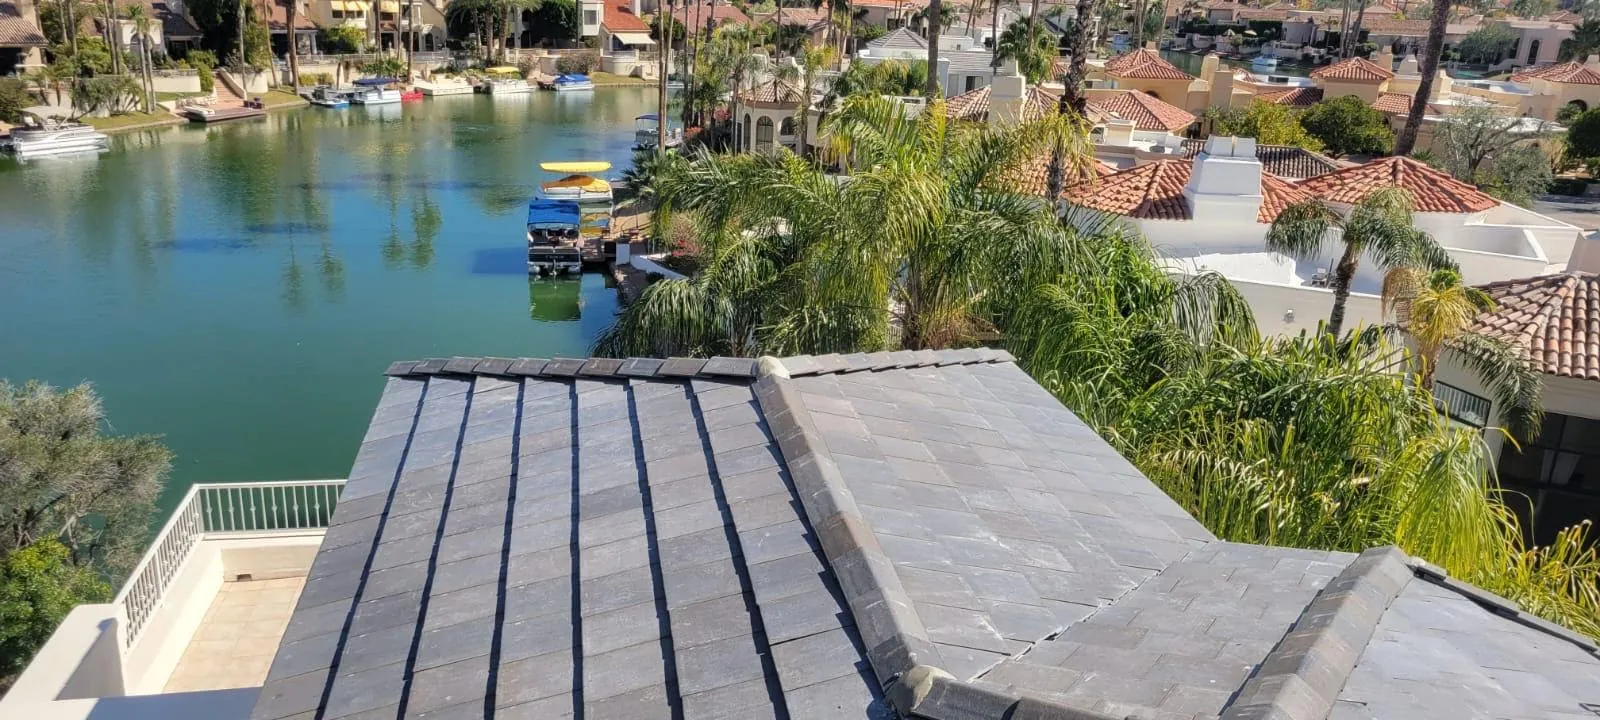 tile roof replacement in mesa az